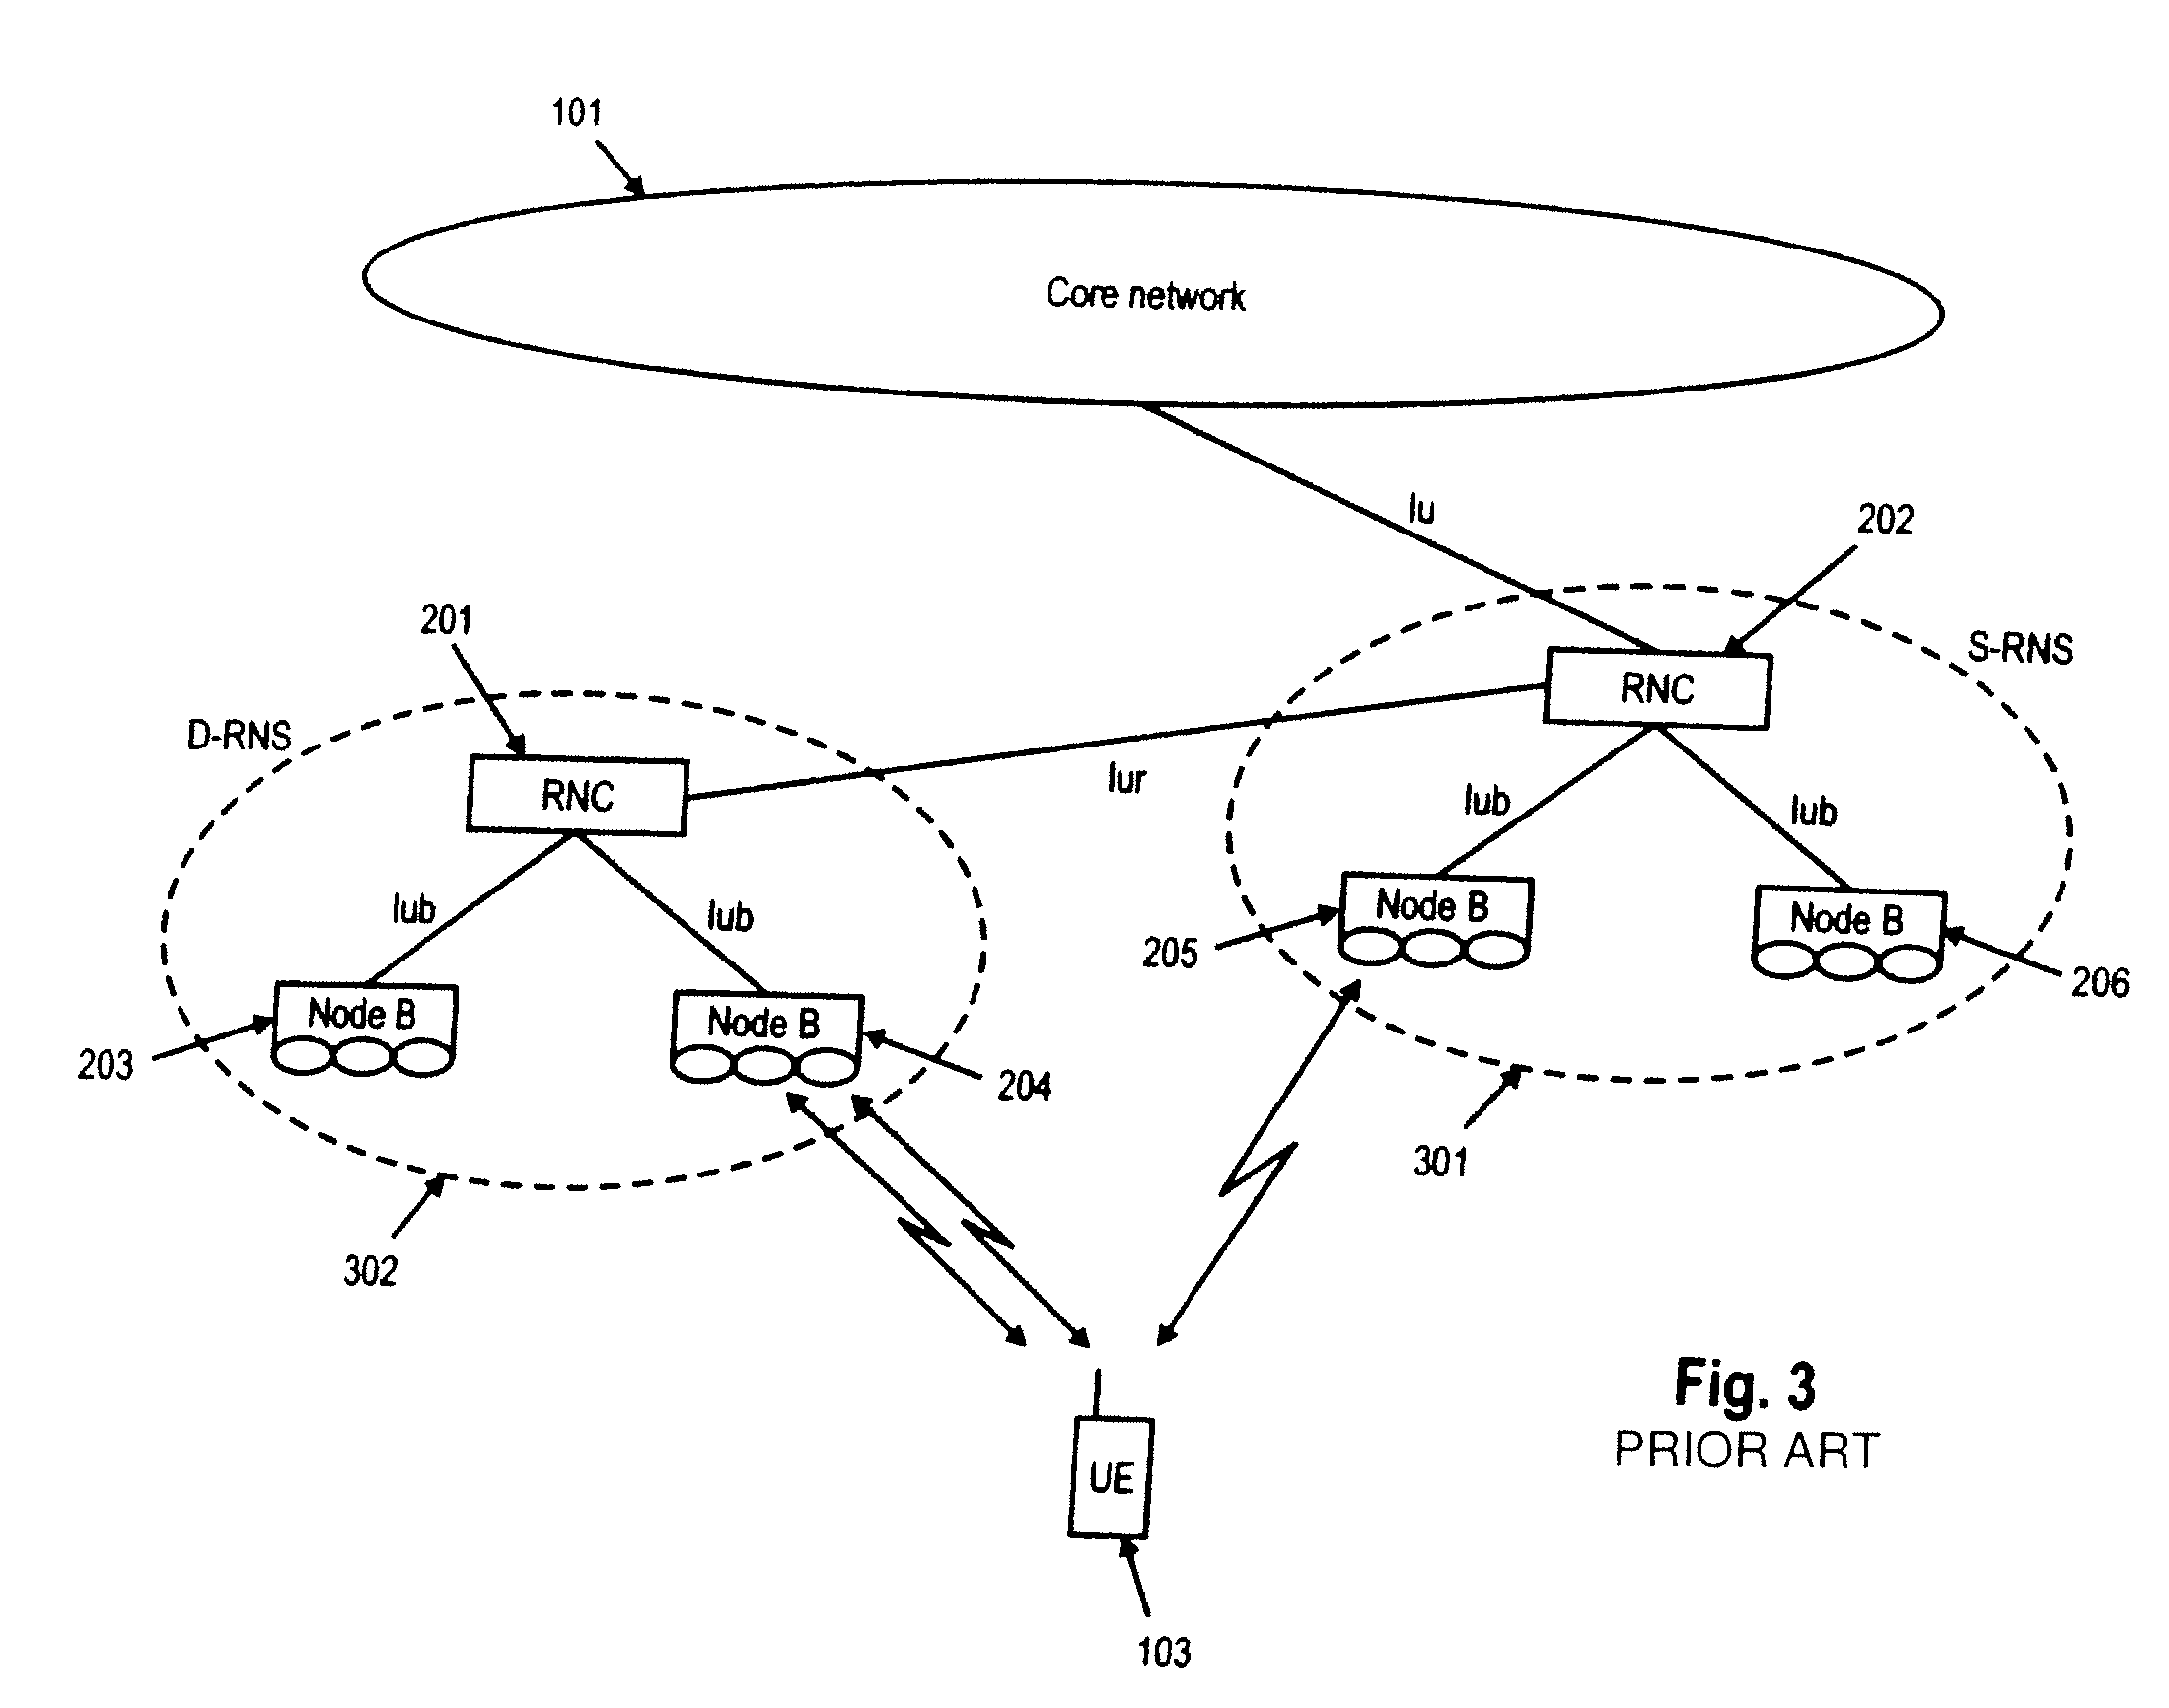 Quality-of-service (QoS)-aware scheduling for uplink transmission on dedicated channels